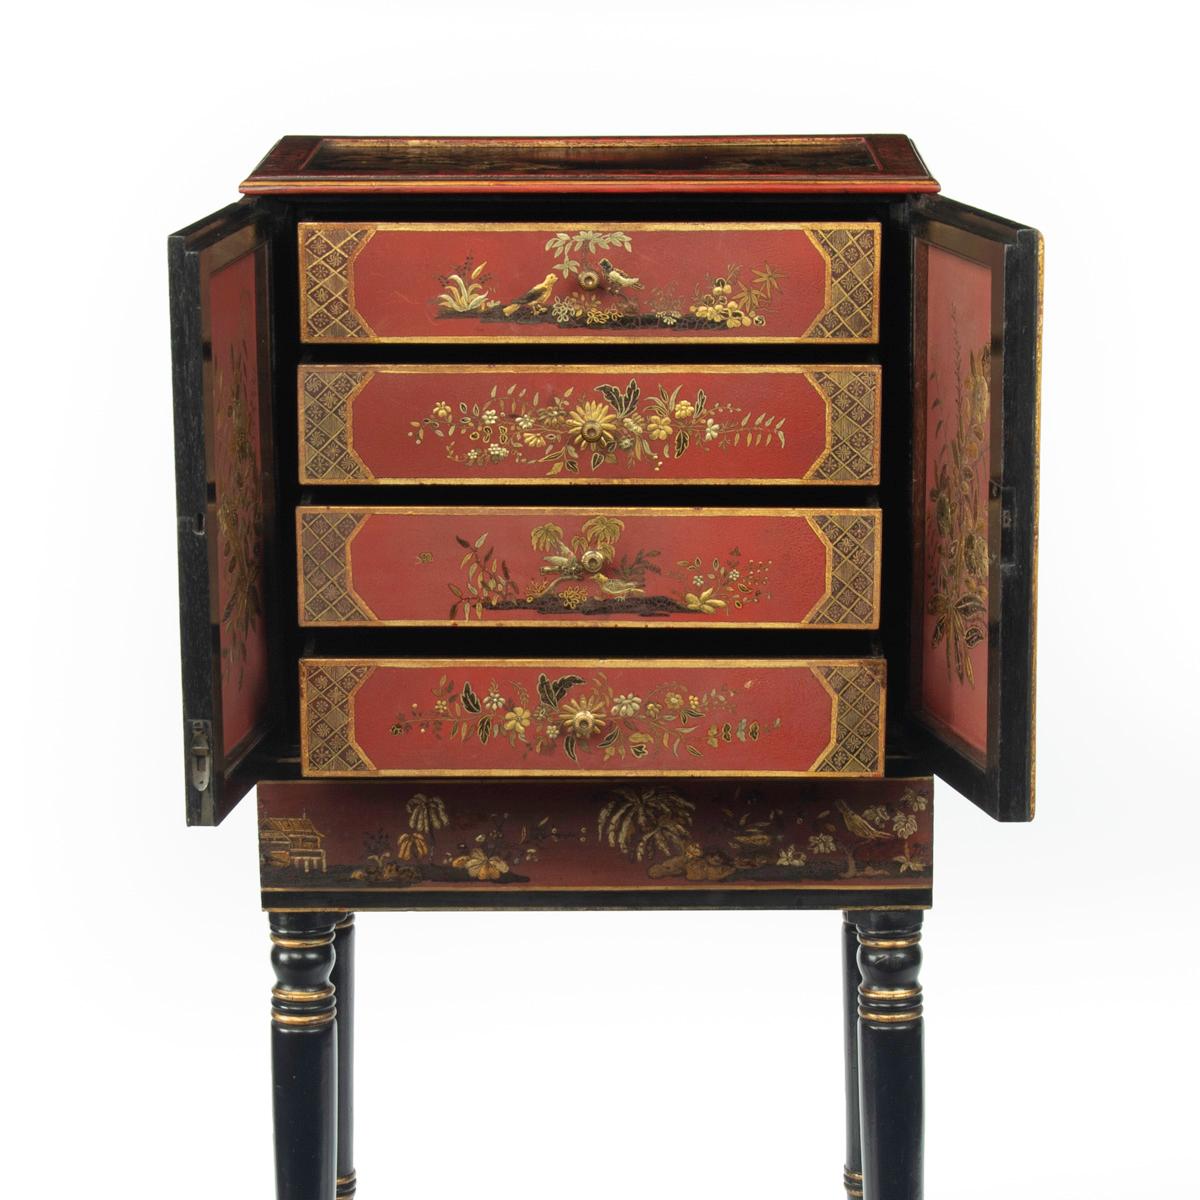 Early 19th Century A delicate Regency Chinoiserie lacquer cabinet For Sale